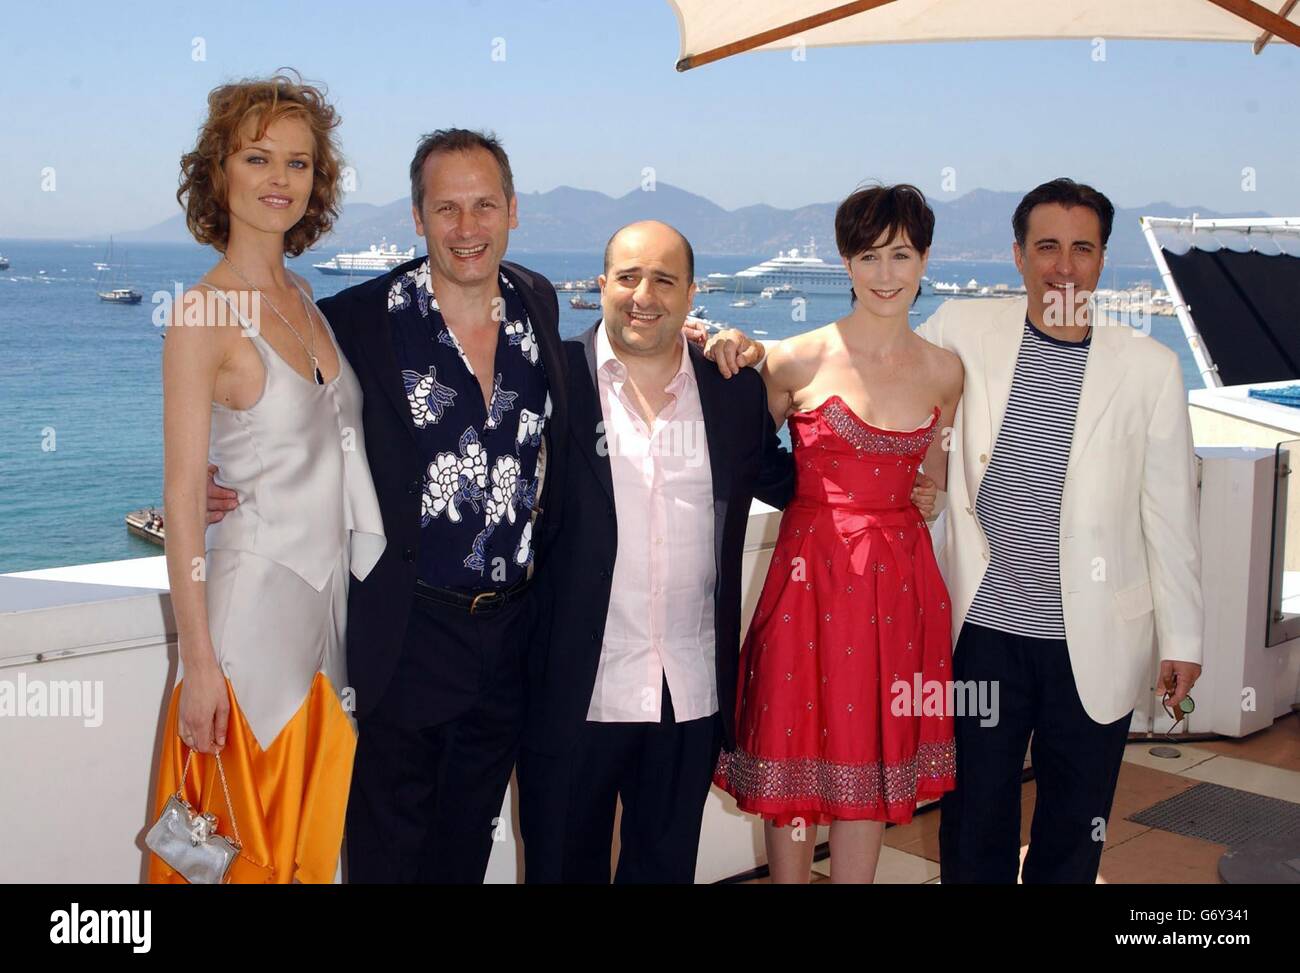 AFP, AP and EPA OUT. (Left-Right) Eva Herzigova, film director Mick Davis, Omid Djalili, Elsa Zylberstein and Andy Garcia during a photocall for their latest film Modigliani, held on the roof of the Noga Hilton Hotel during the 57th Cannes Film Festival in France. Stock Photo